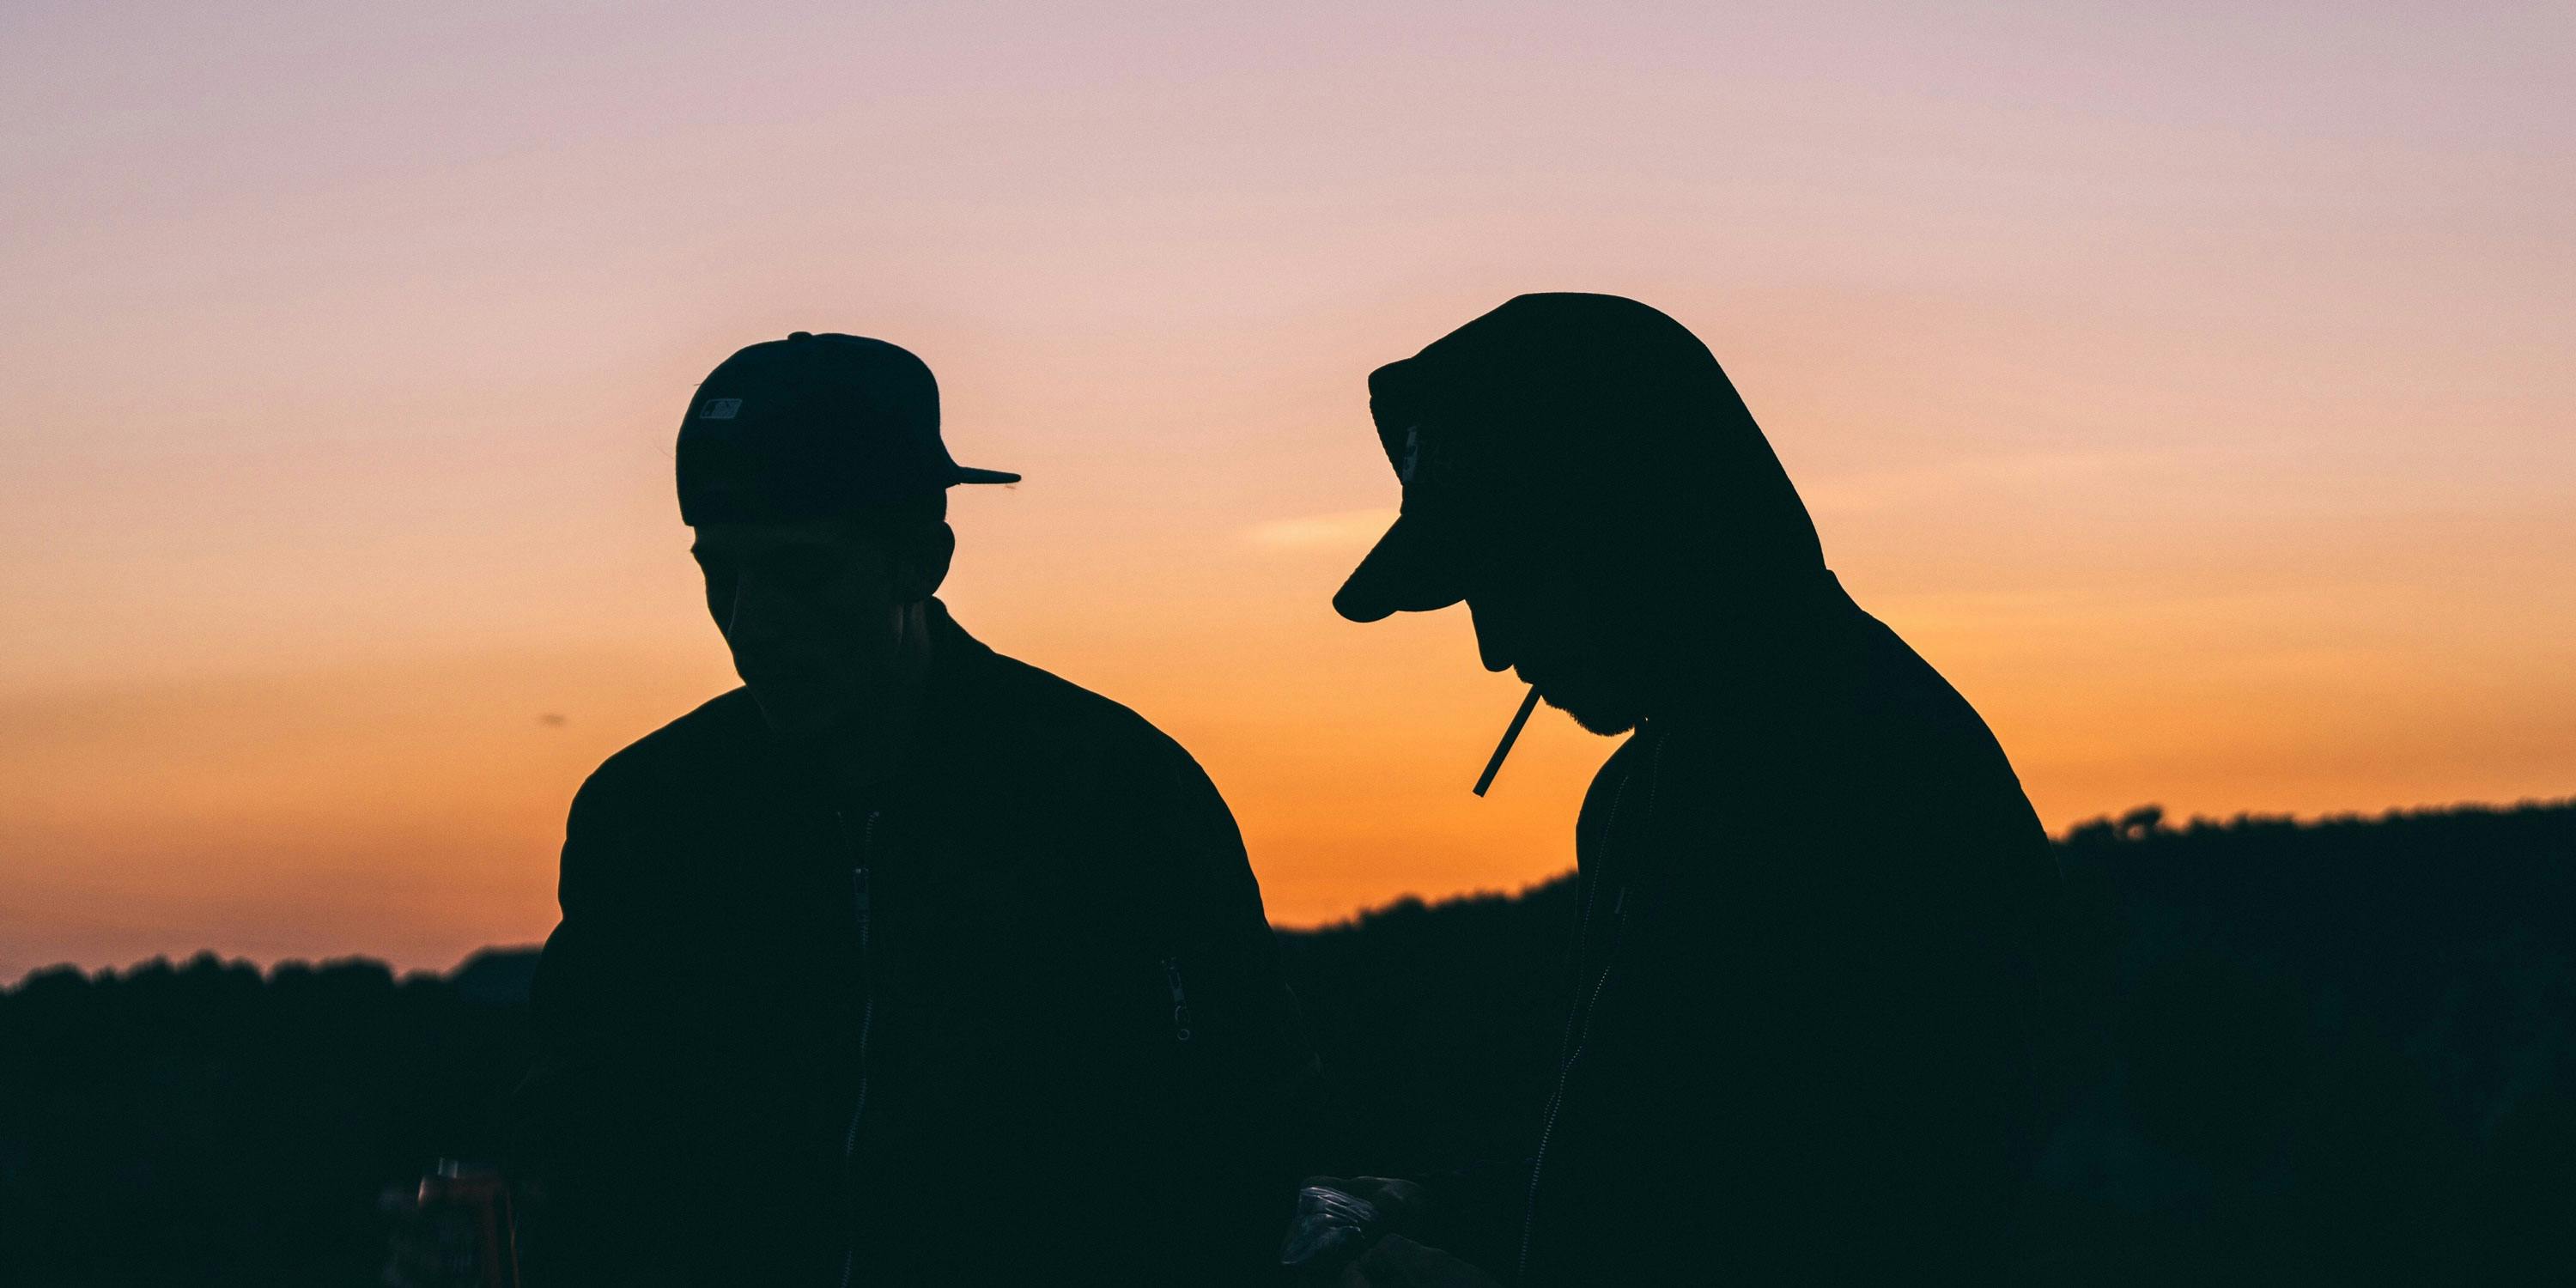 Most universities prohibit weed smoking on campus. Here, two students are shown smoking at sunset